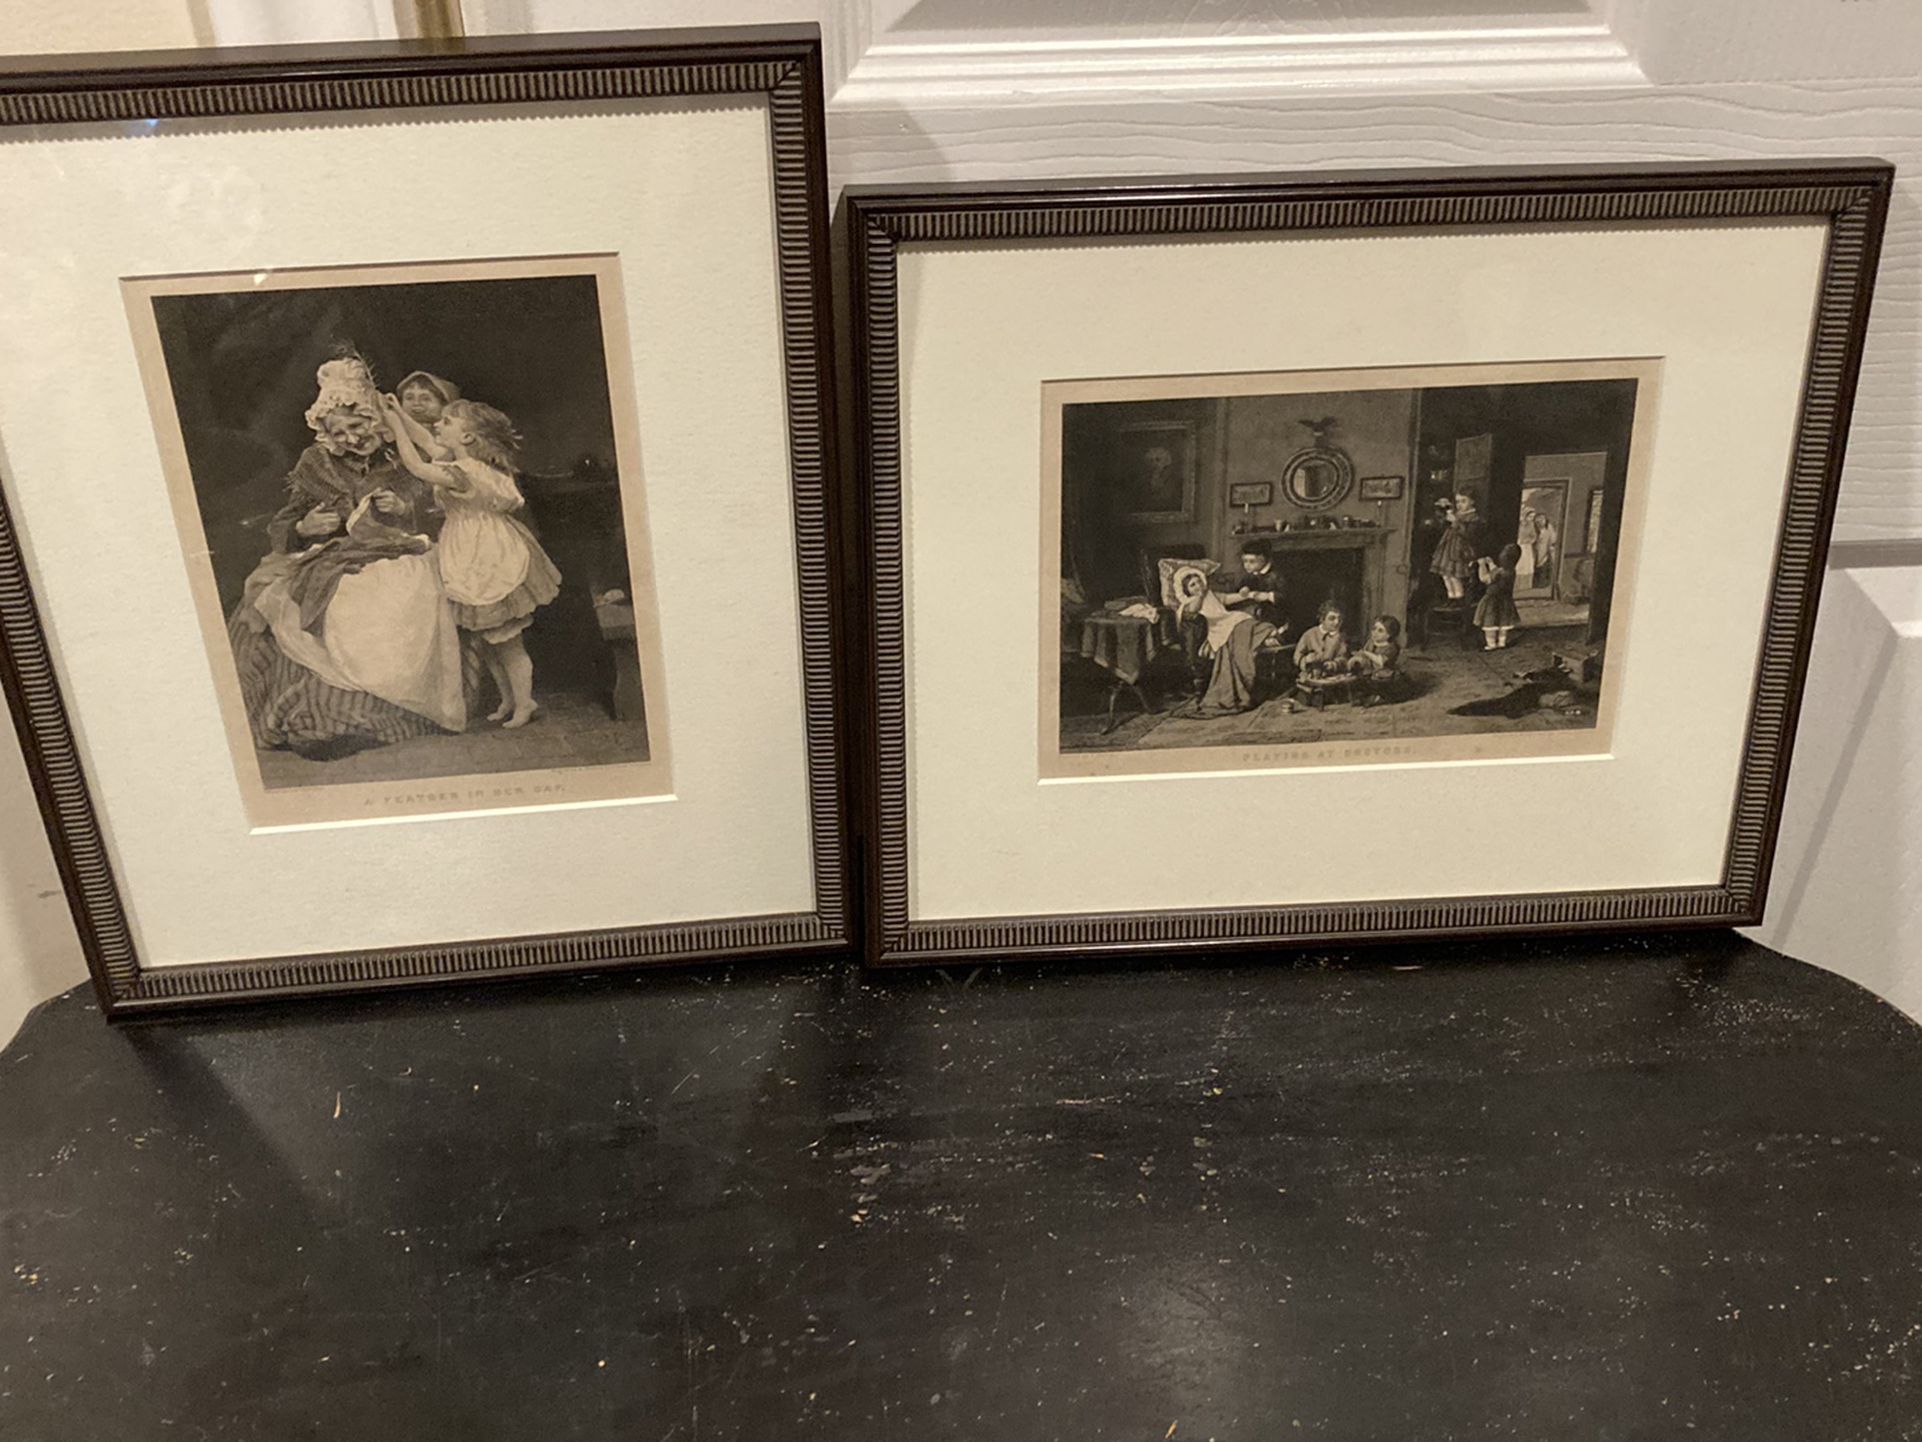 Awesome Pair Of Antique B&W Prints Under Museum Glass & Frames!